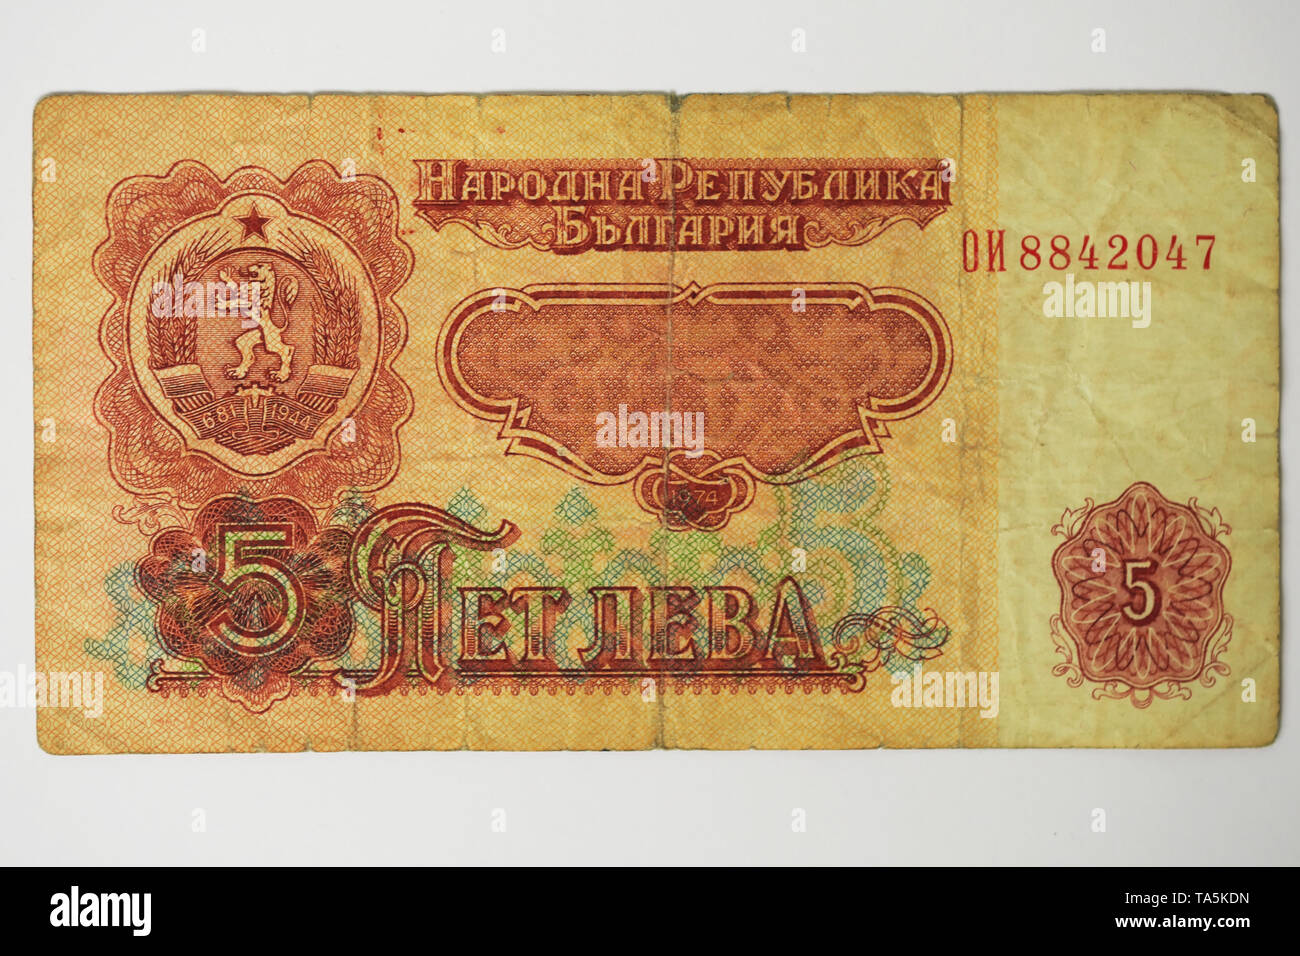 Treasury card of the National Bank of Bulgaria in denominations of five leva, second-hand, paper money close-up Stock Photo